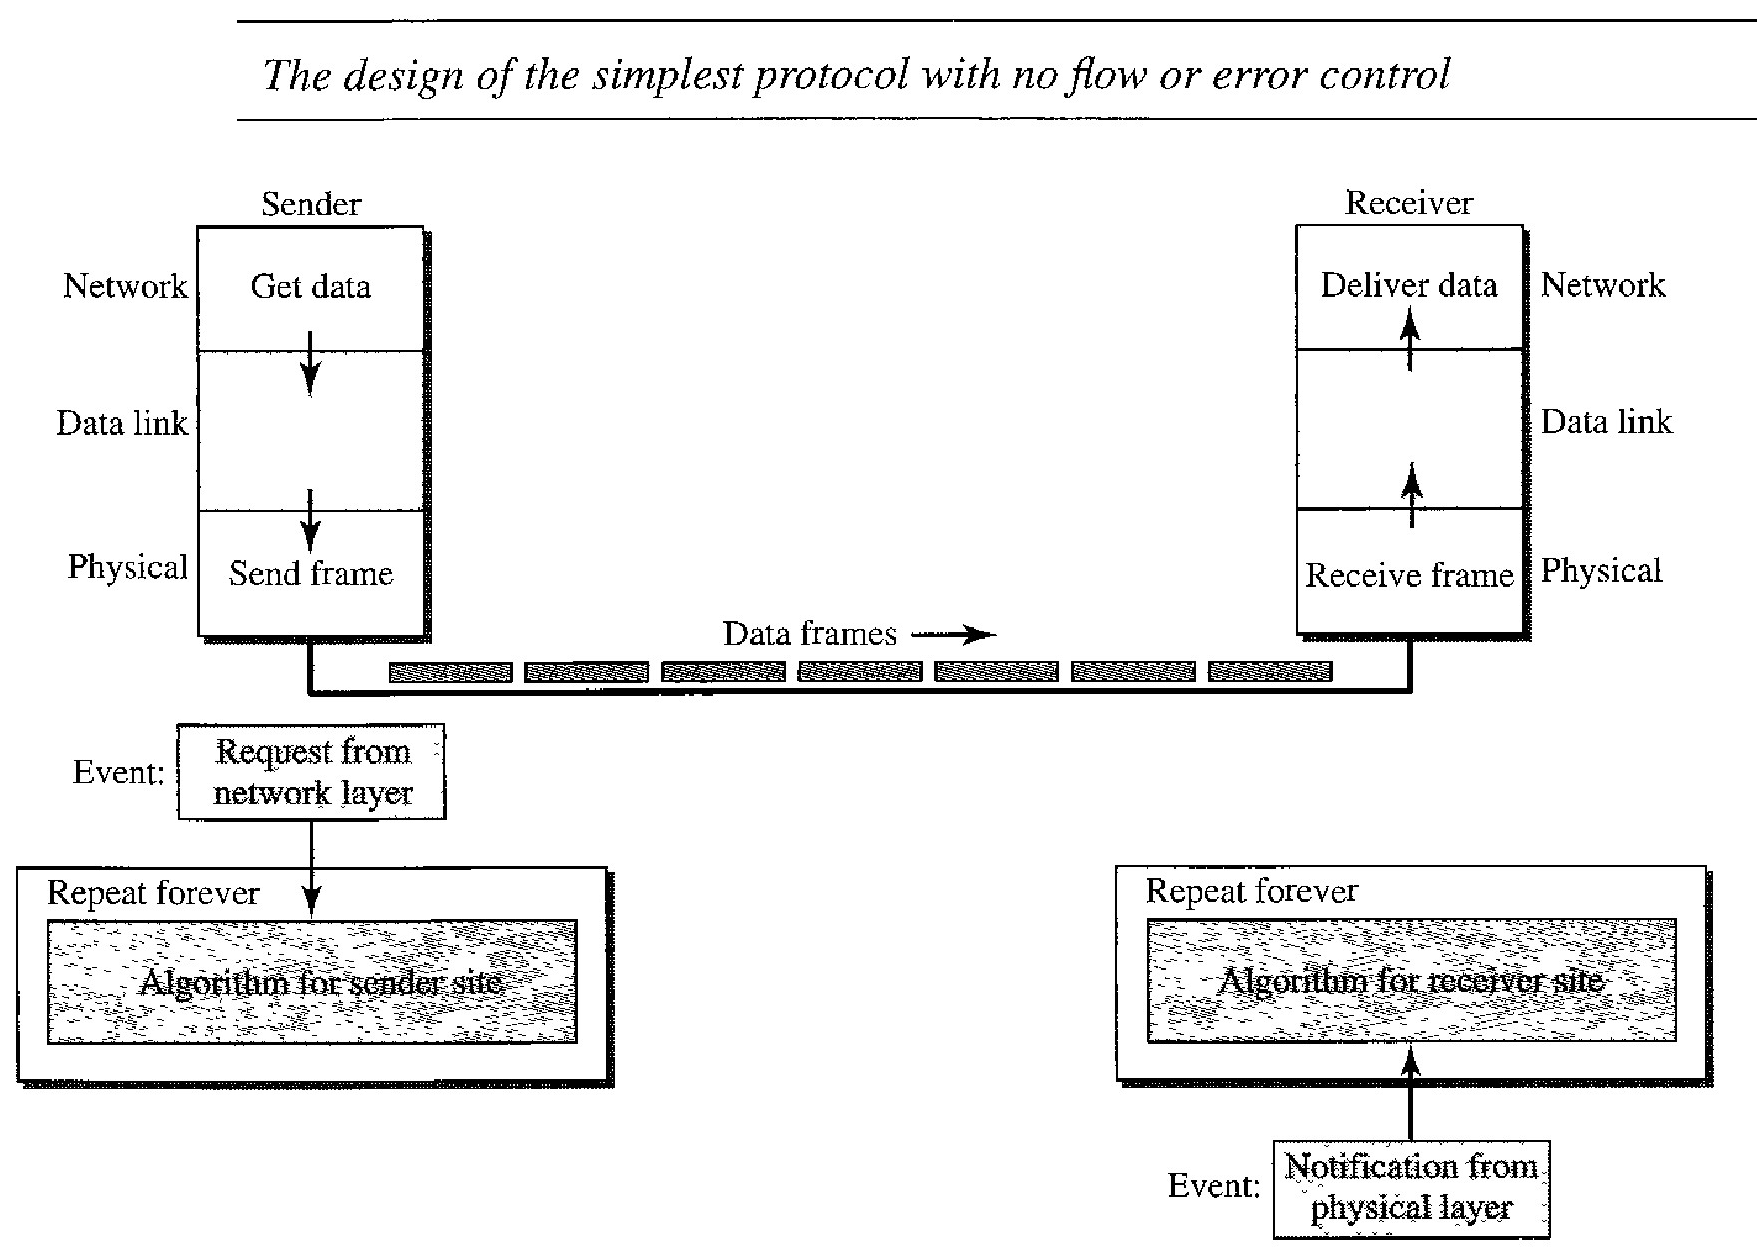 Protocols - Noiseless (error-free) channels and Noisy (error-creating) channels